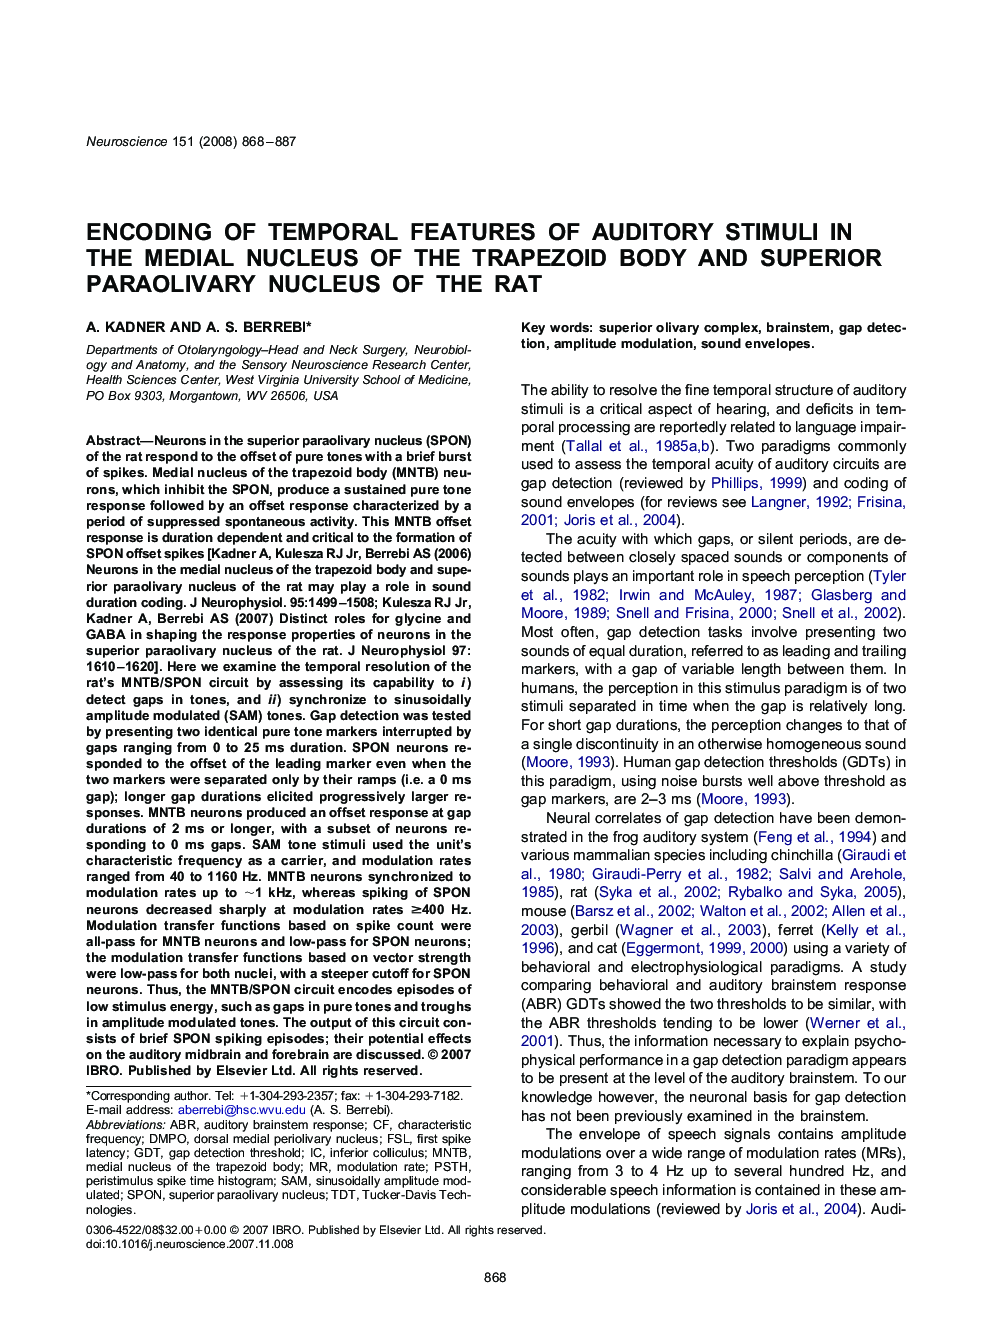 Encoding of temporal features of auditory stimuli in the medial nucleus of the trapezoid body and superior paraolivary nucleus of the rat